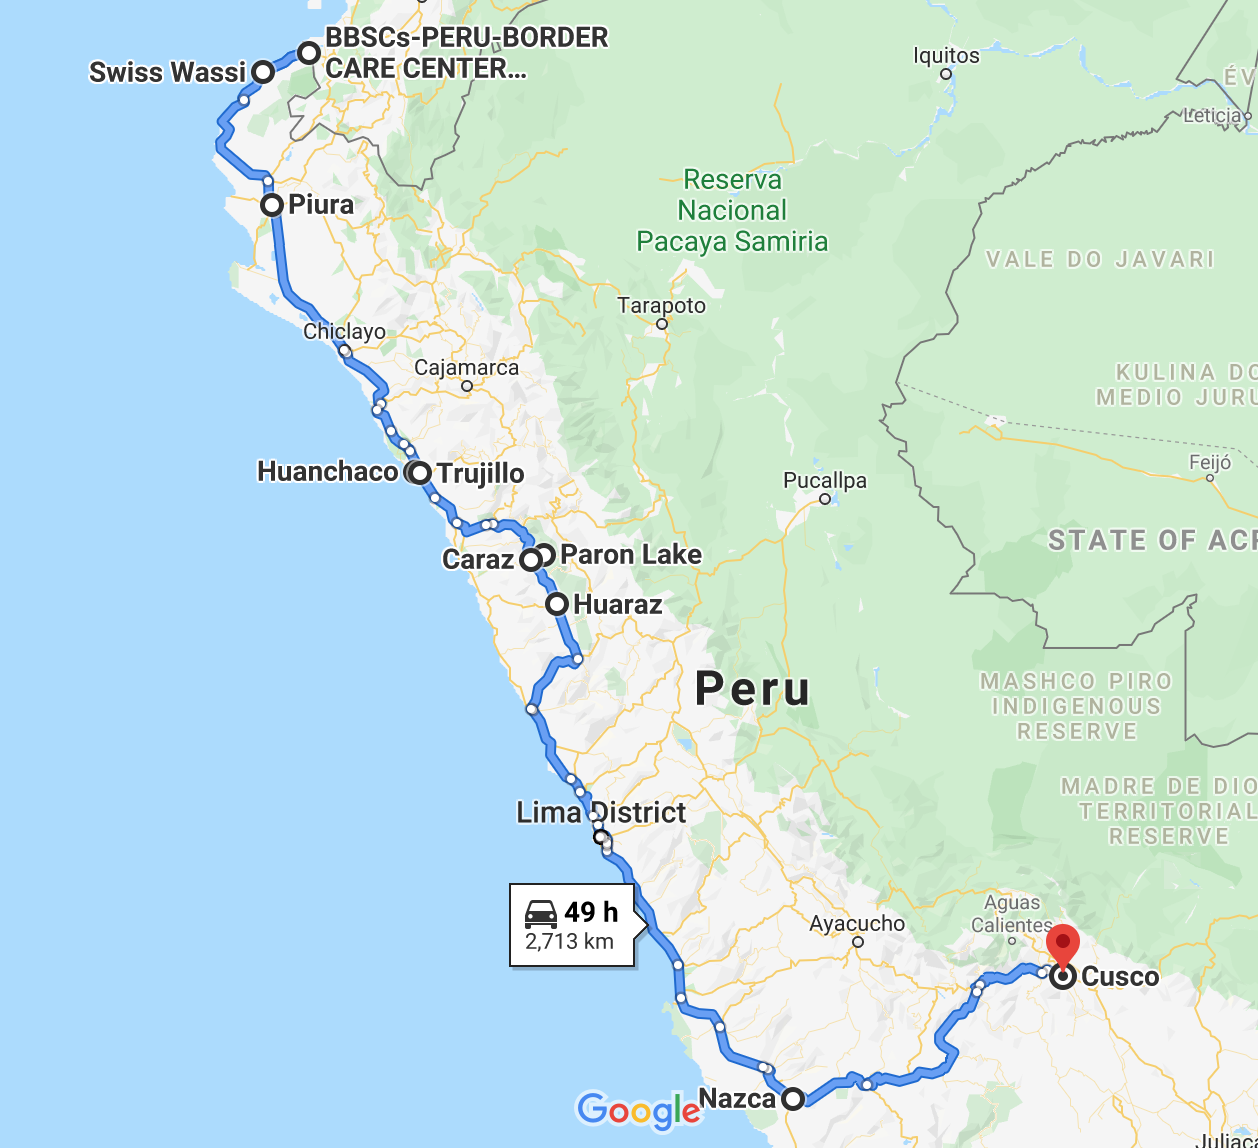 The route to Machu Picchu from Peru's northern border 